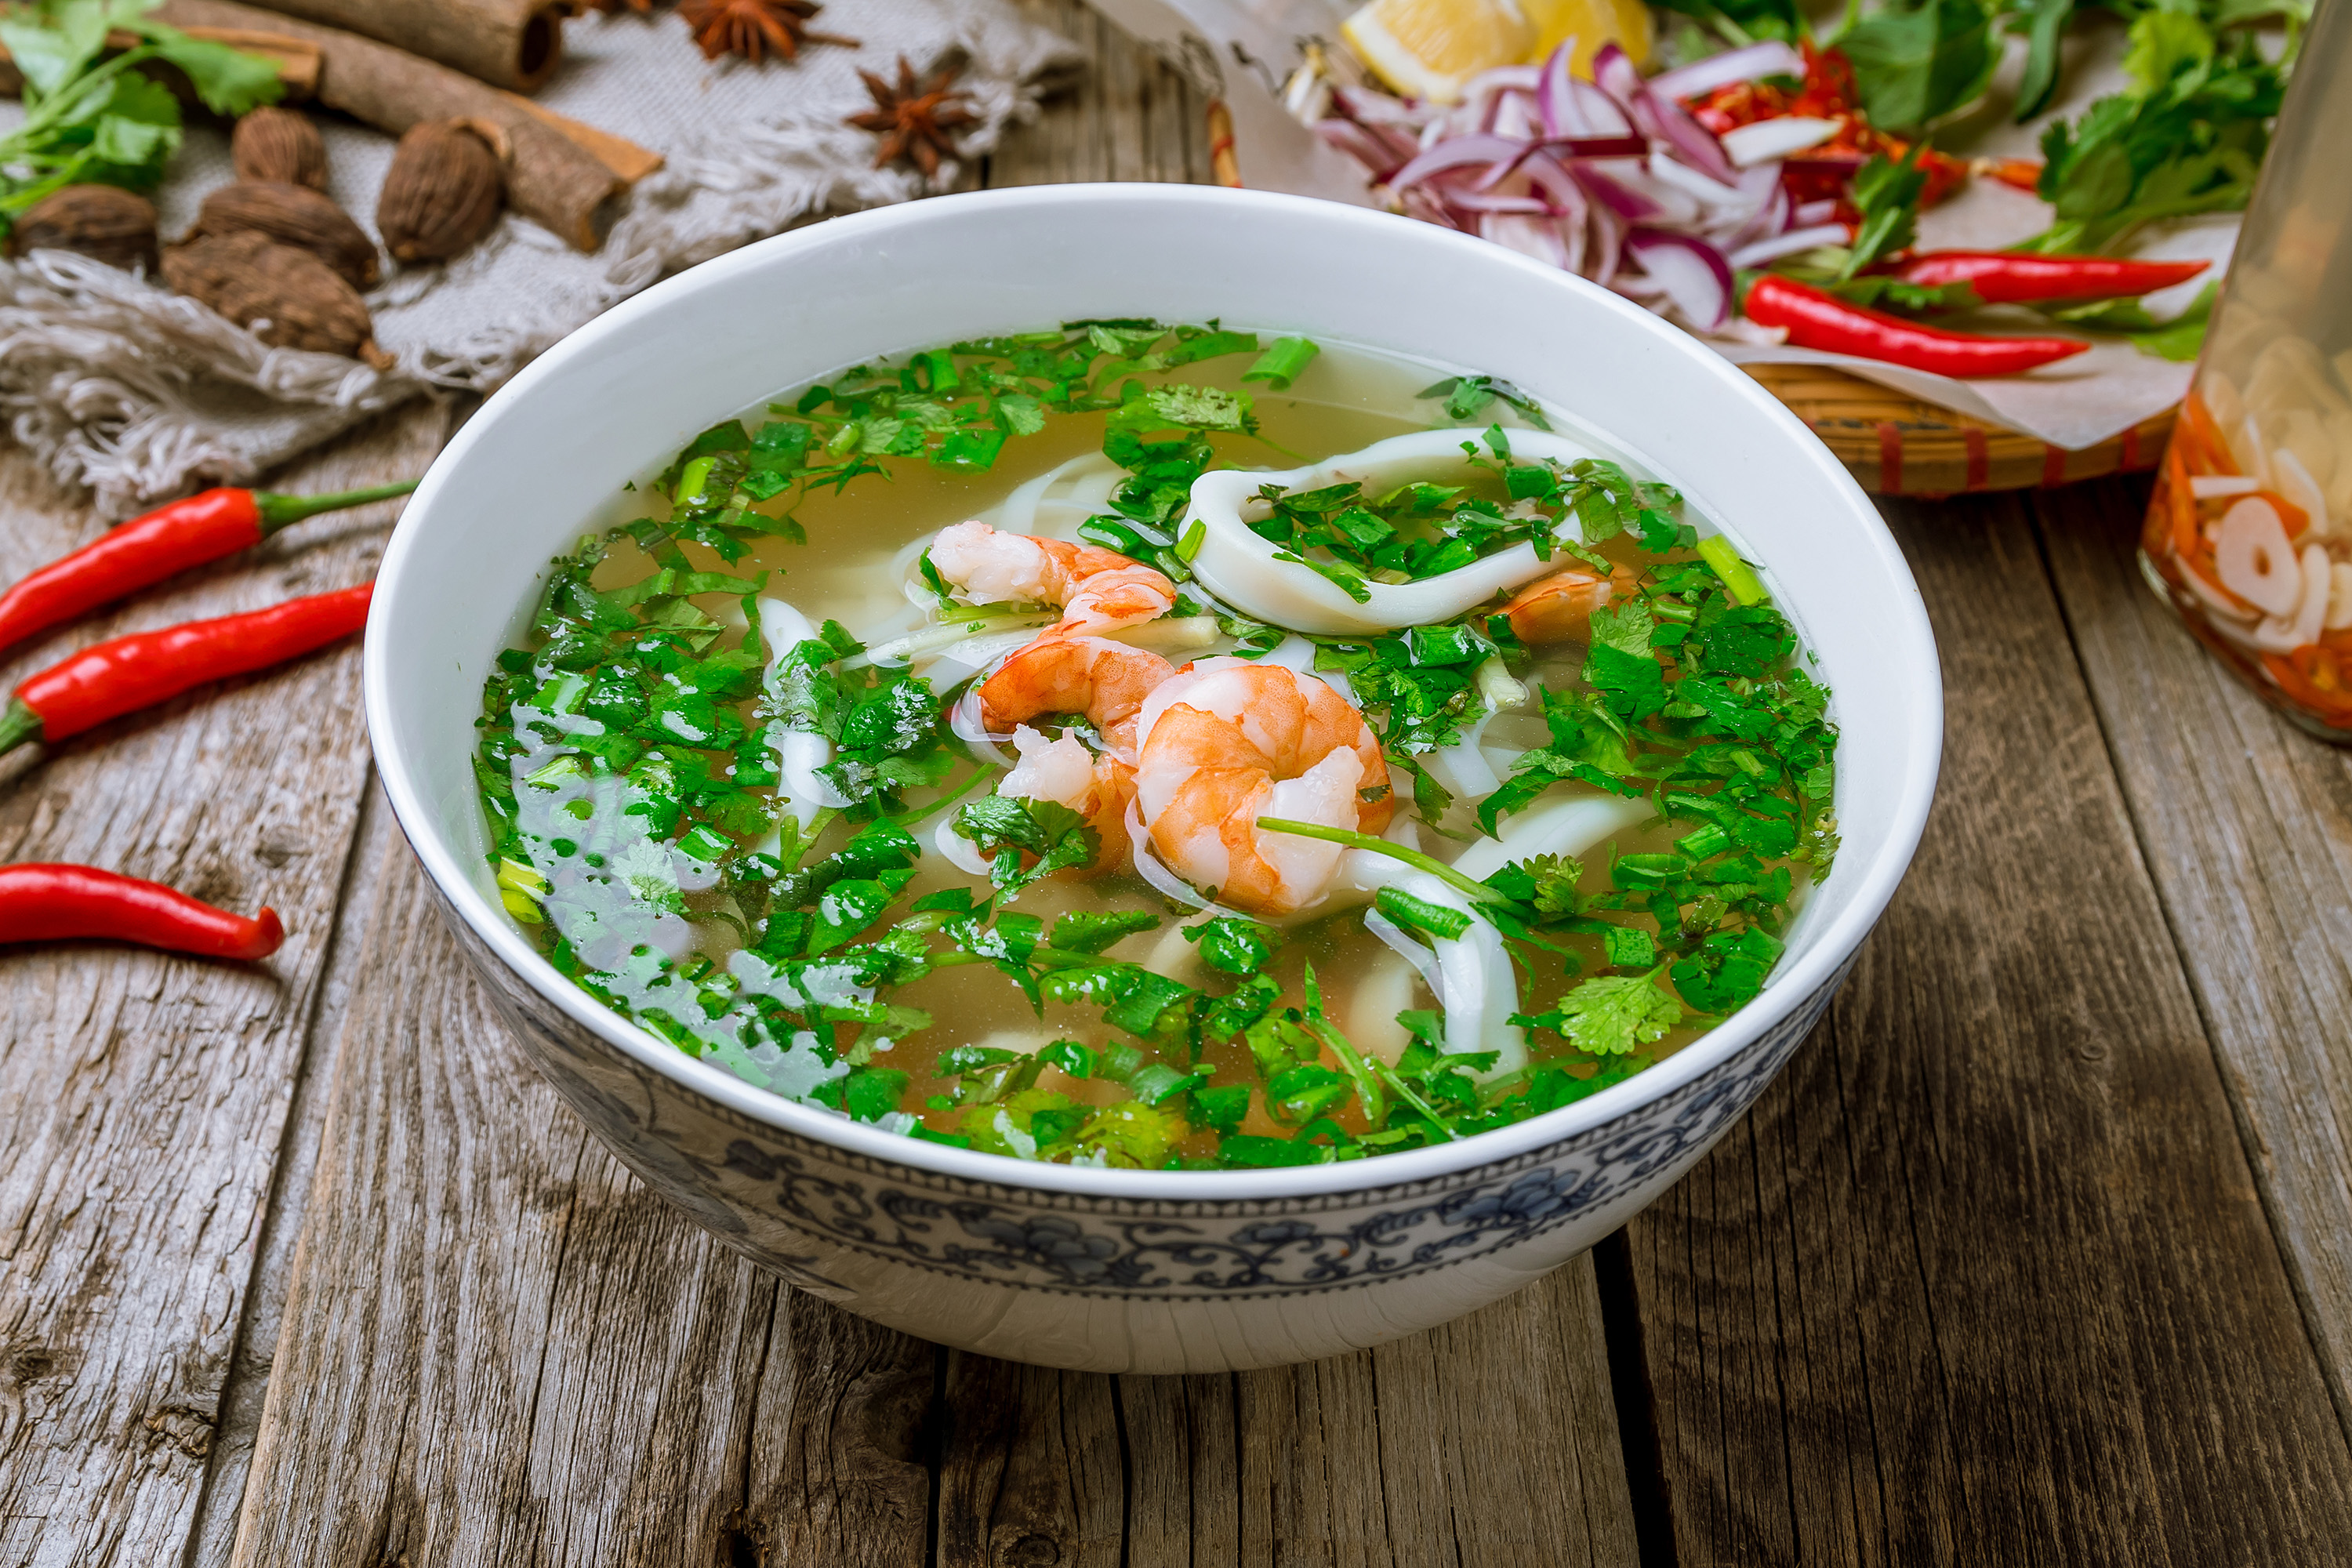 Phở Hải Sản | Traditional Noodle Soup From Vietnam, Southeast Asia